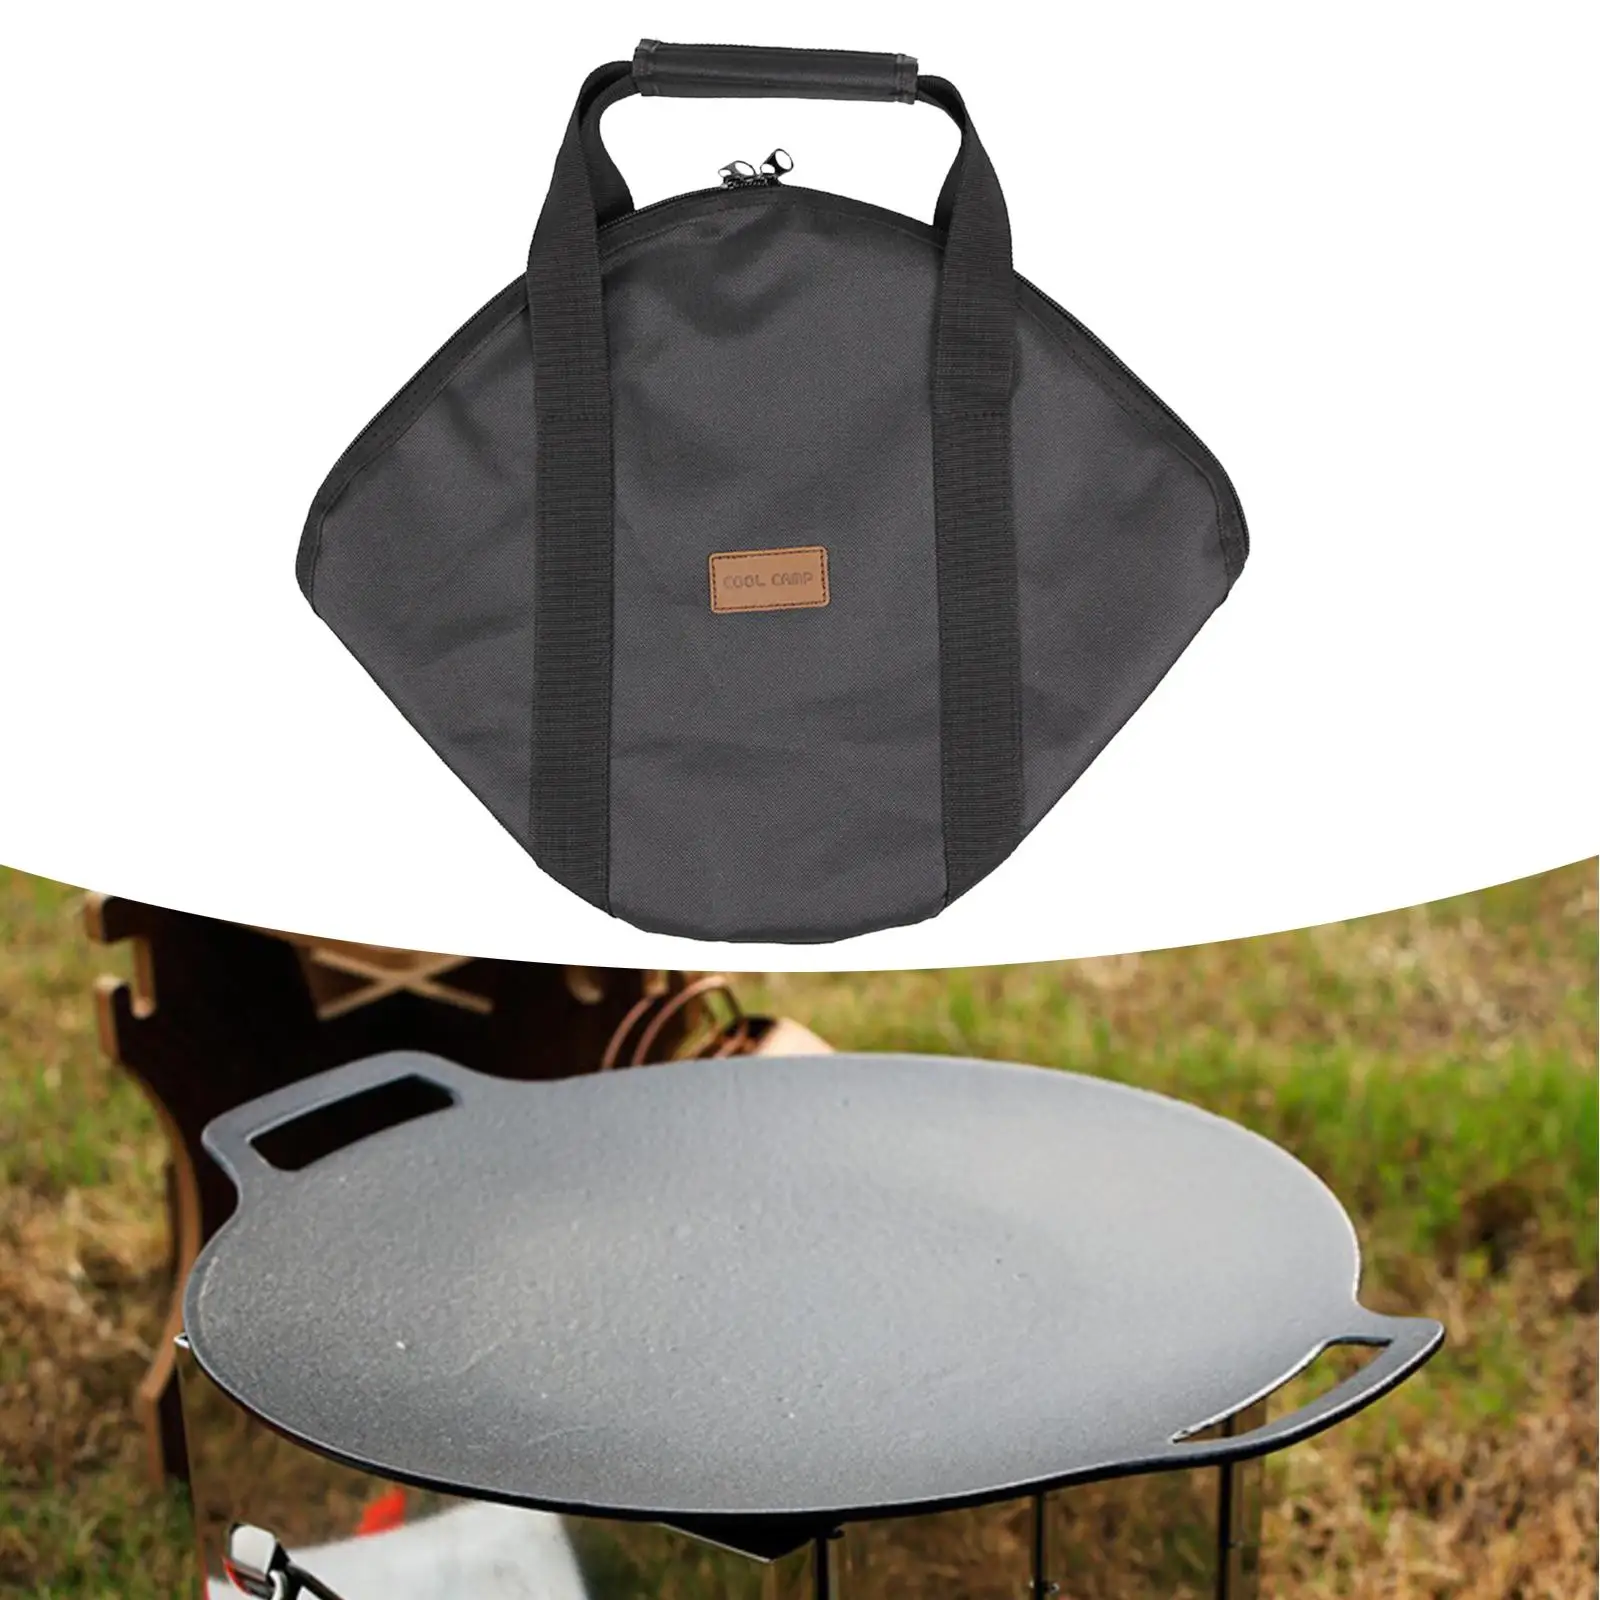 Cast Iron Outdoor Baking Tray Storage Bag Cast Iron Plate Pan Carrying Bag BBQ Griddles Cookware Grilling Pan Accessories